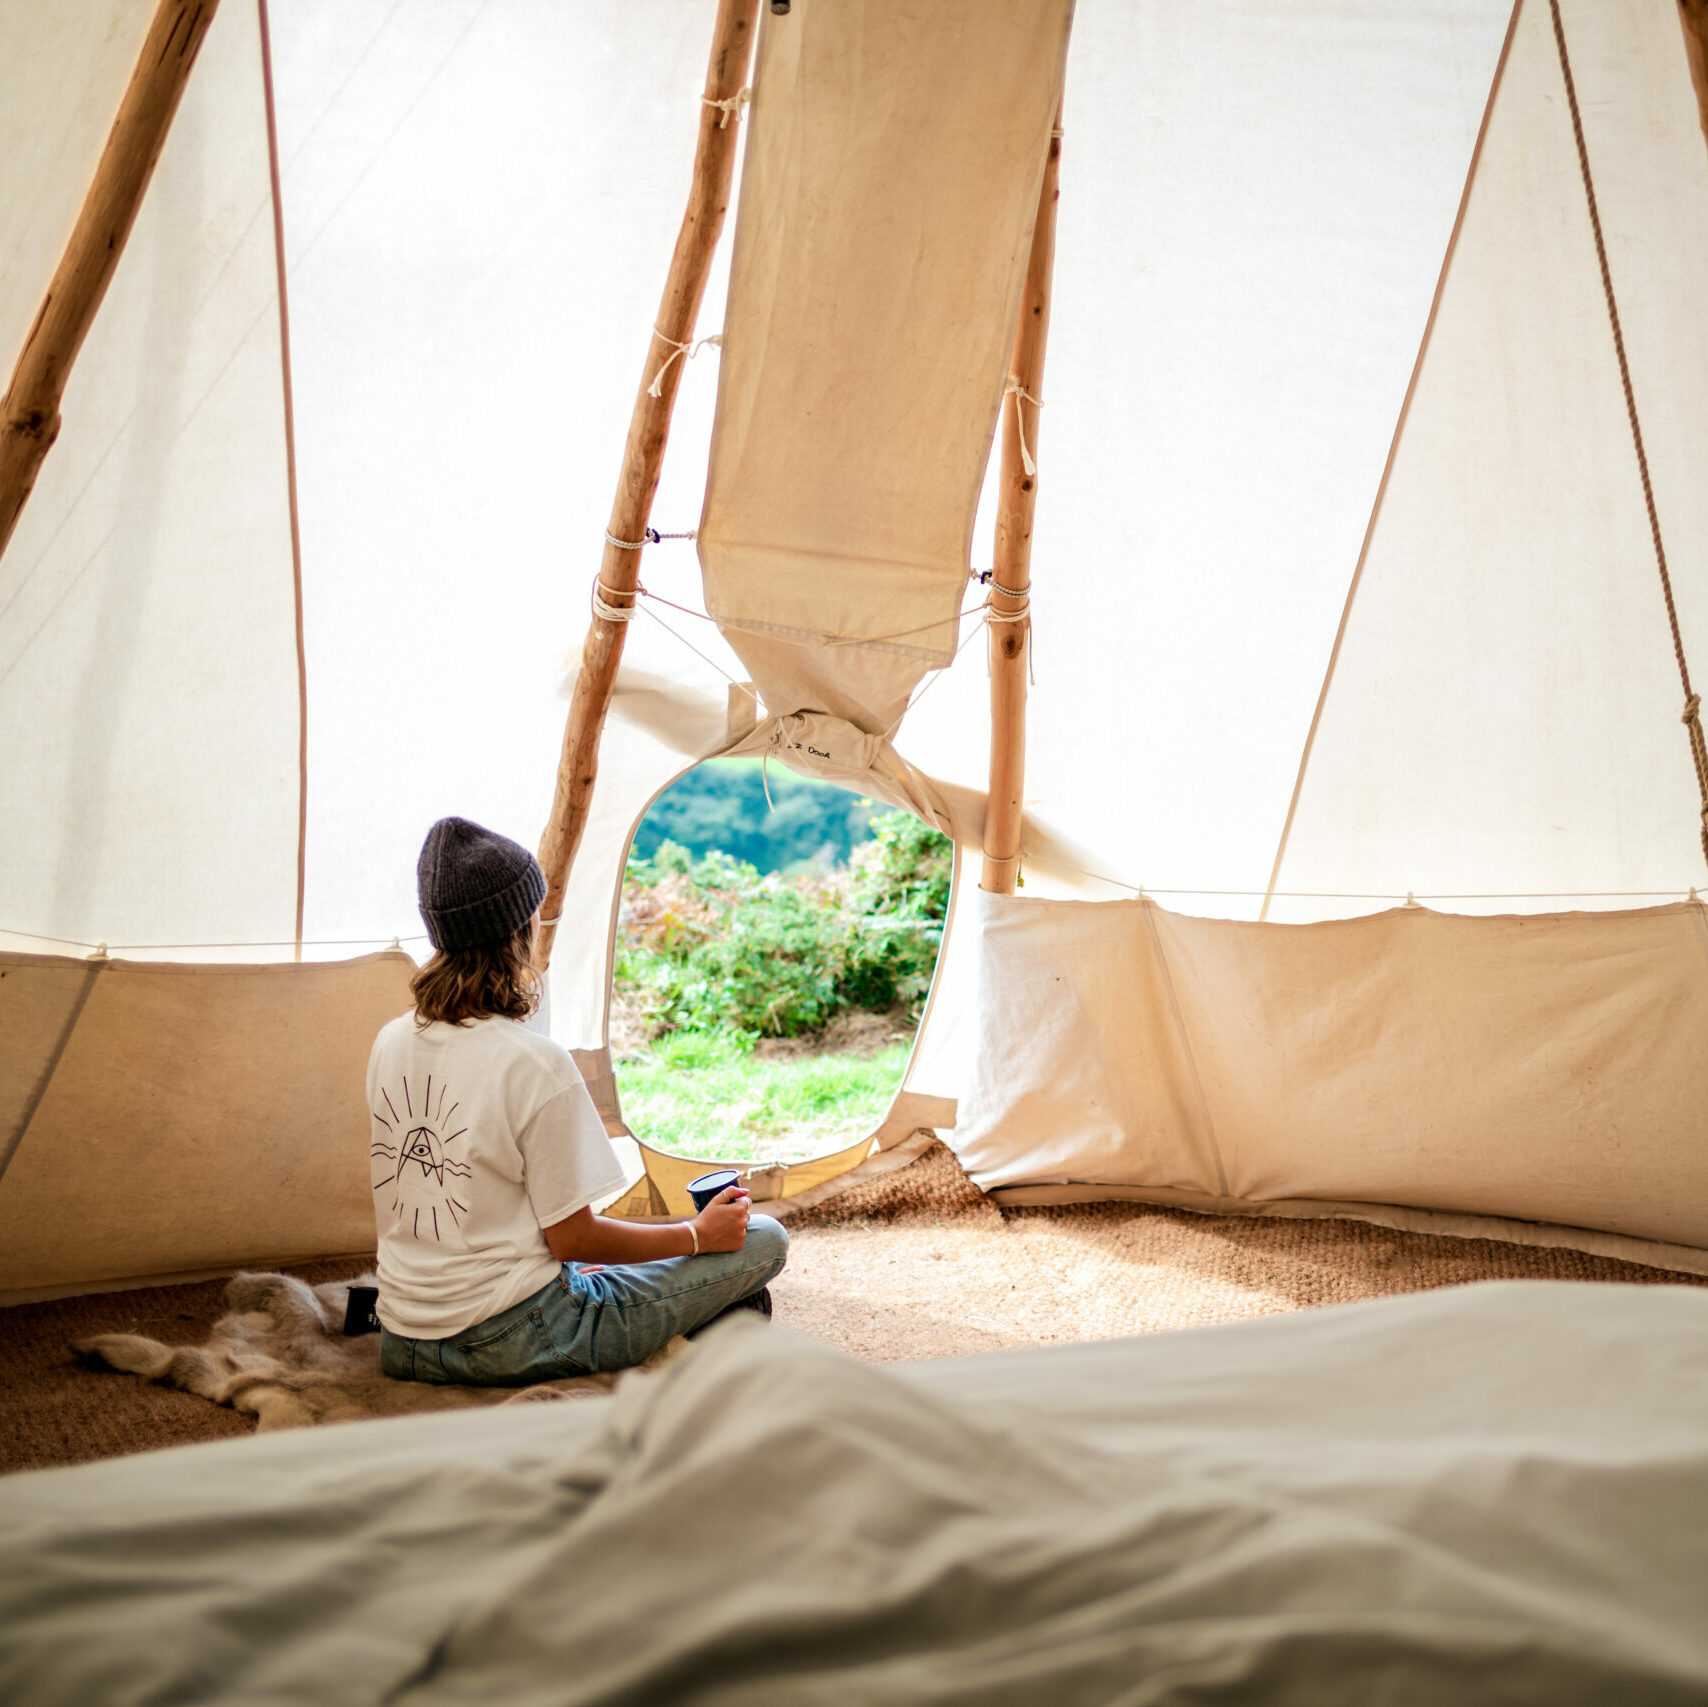 interior of a white canvas tipi, with a woman sitting peacefully